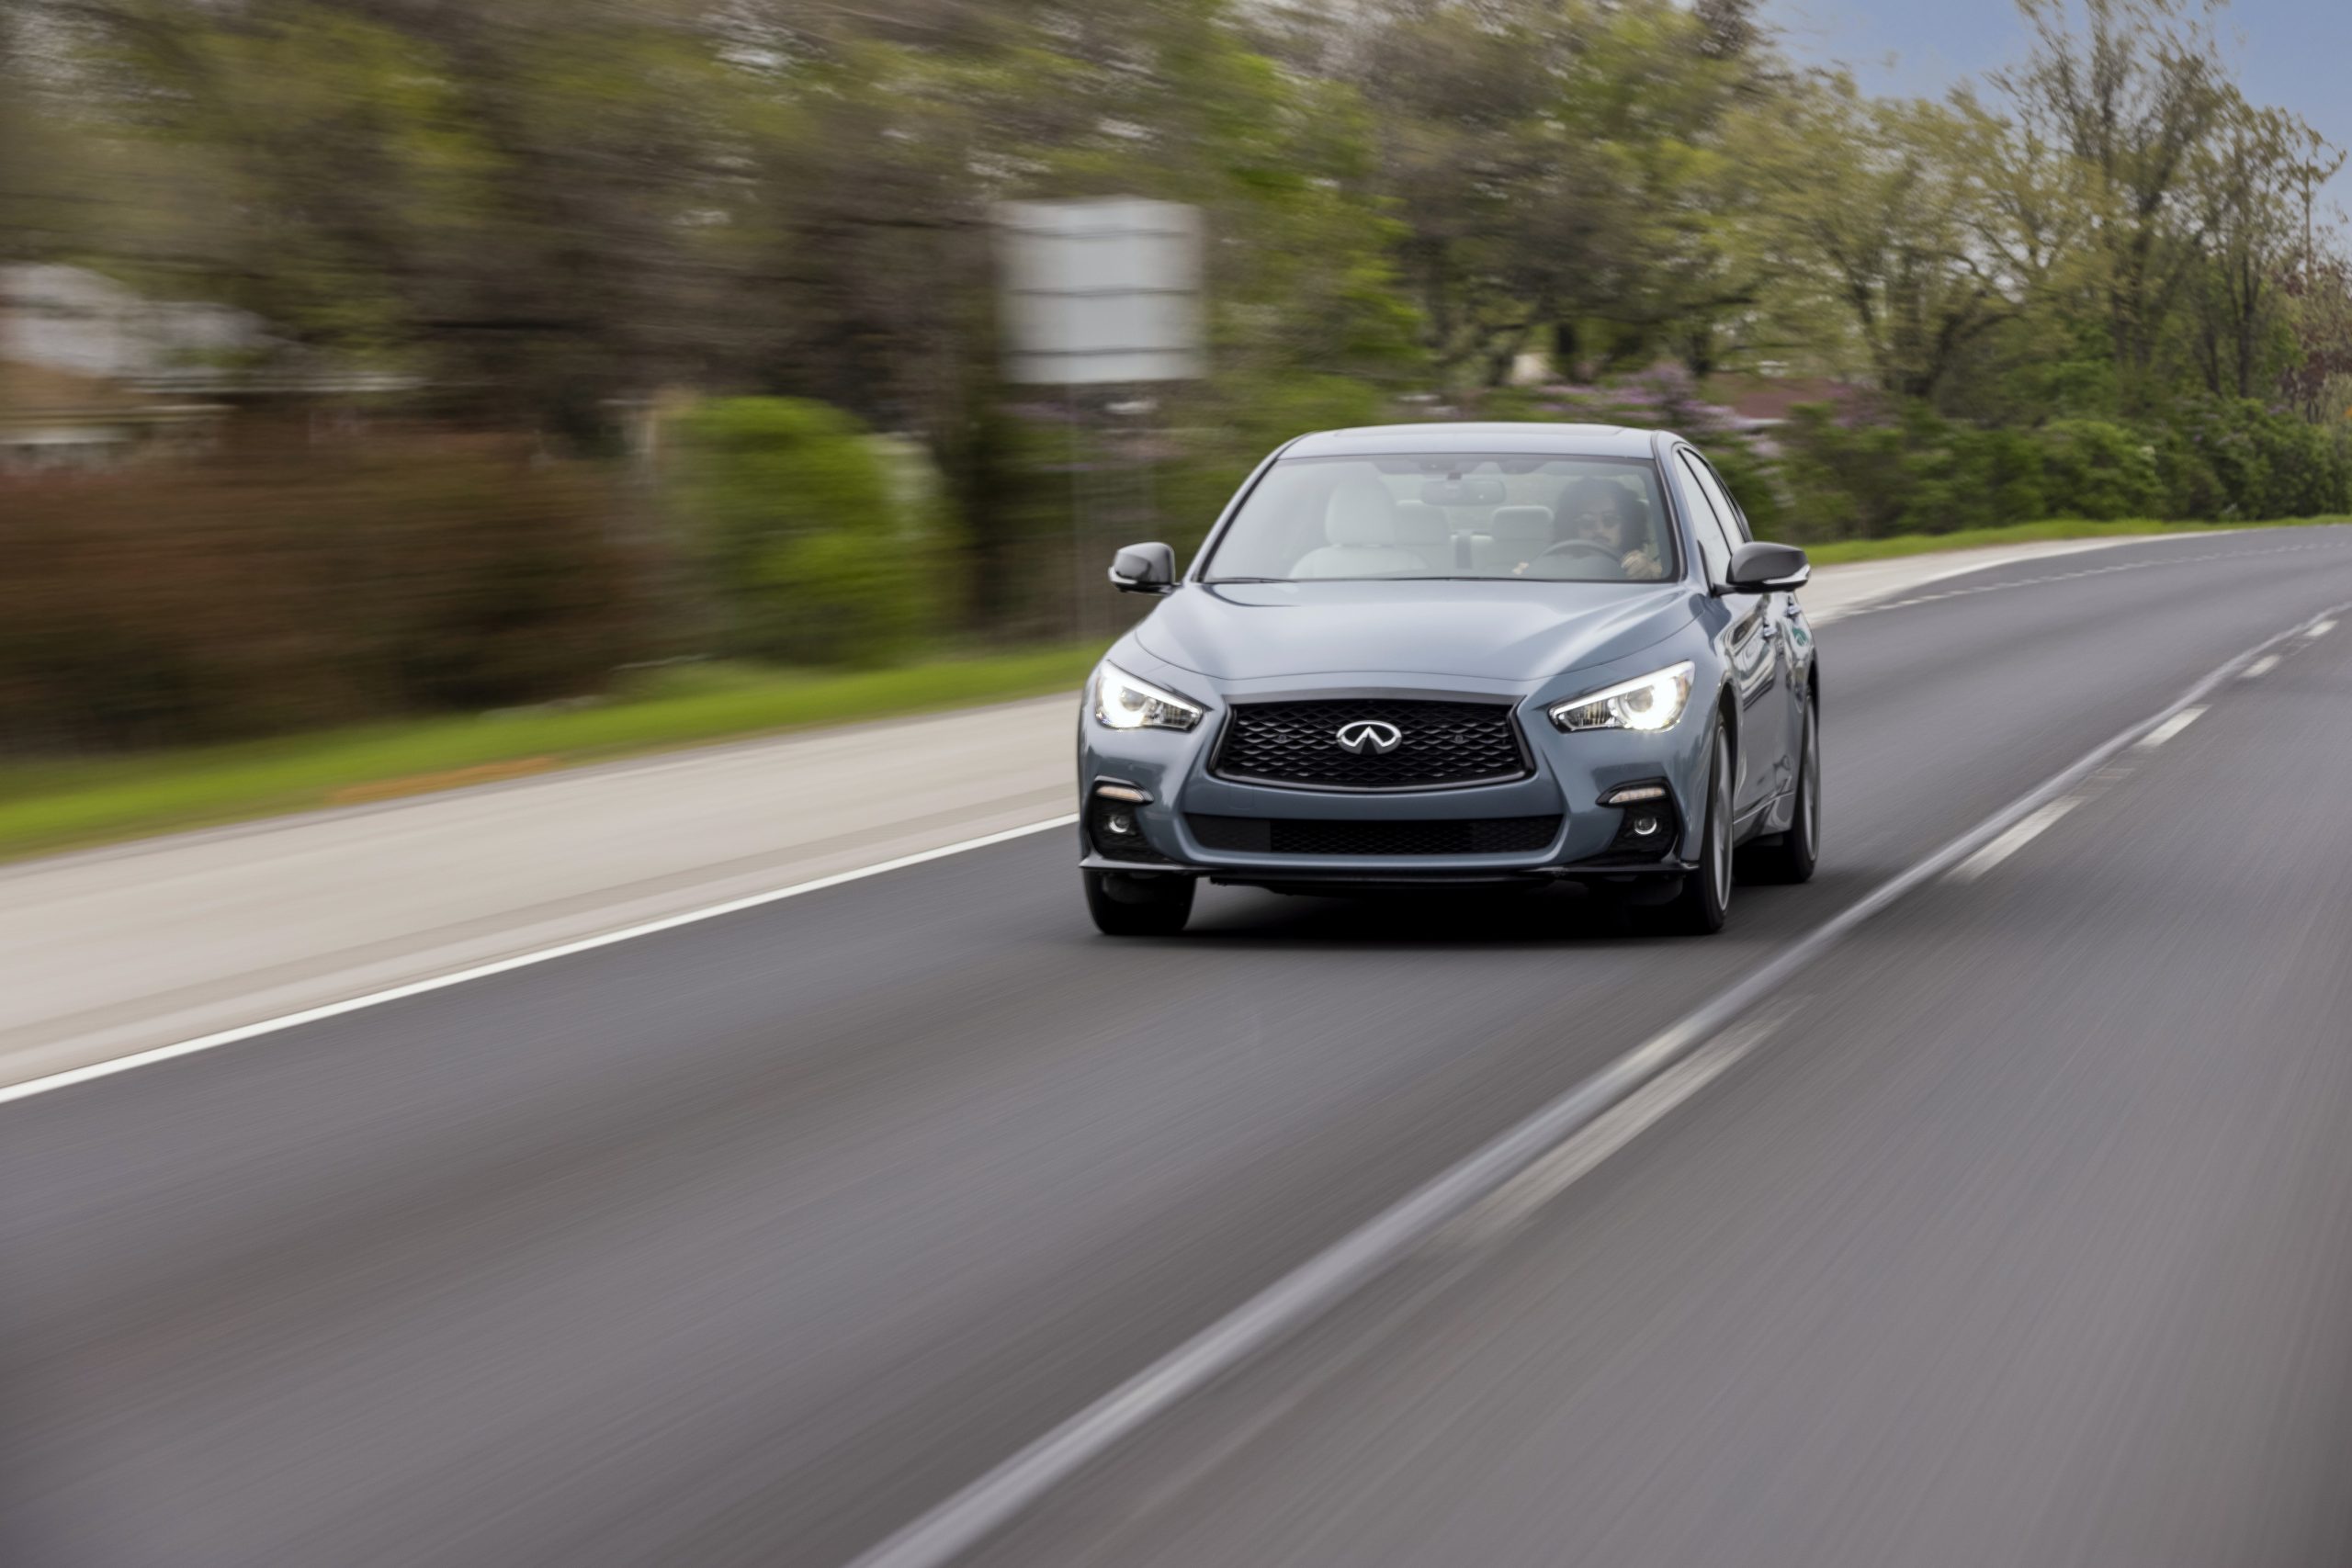 The 2022 Infiniti Q50 driving down the road